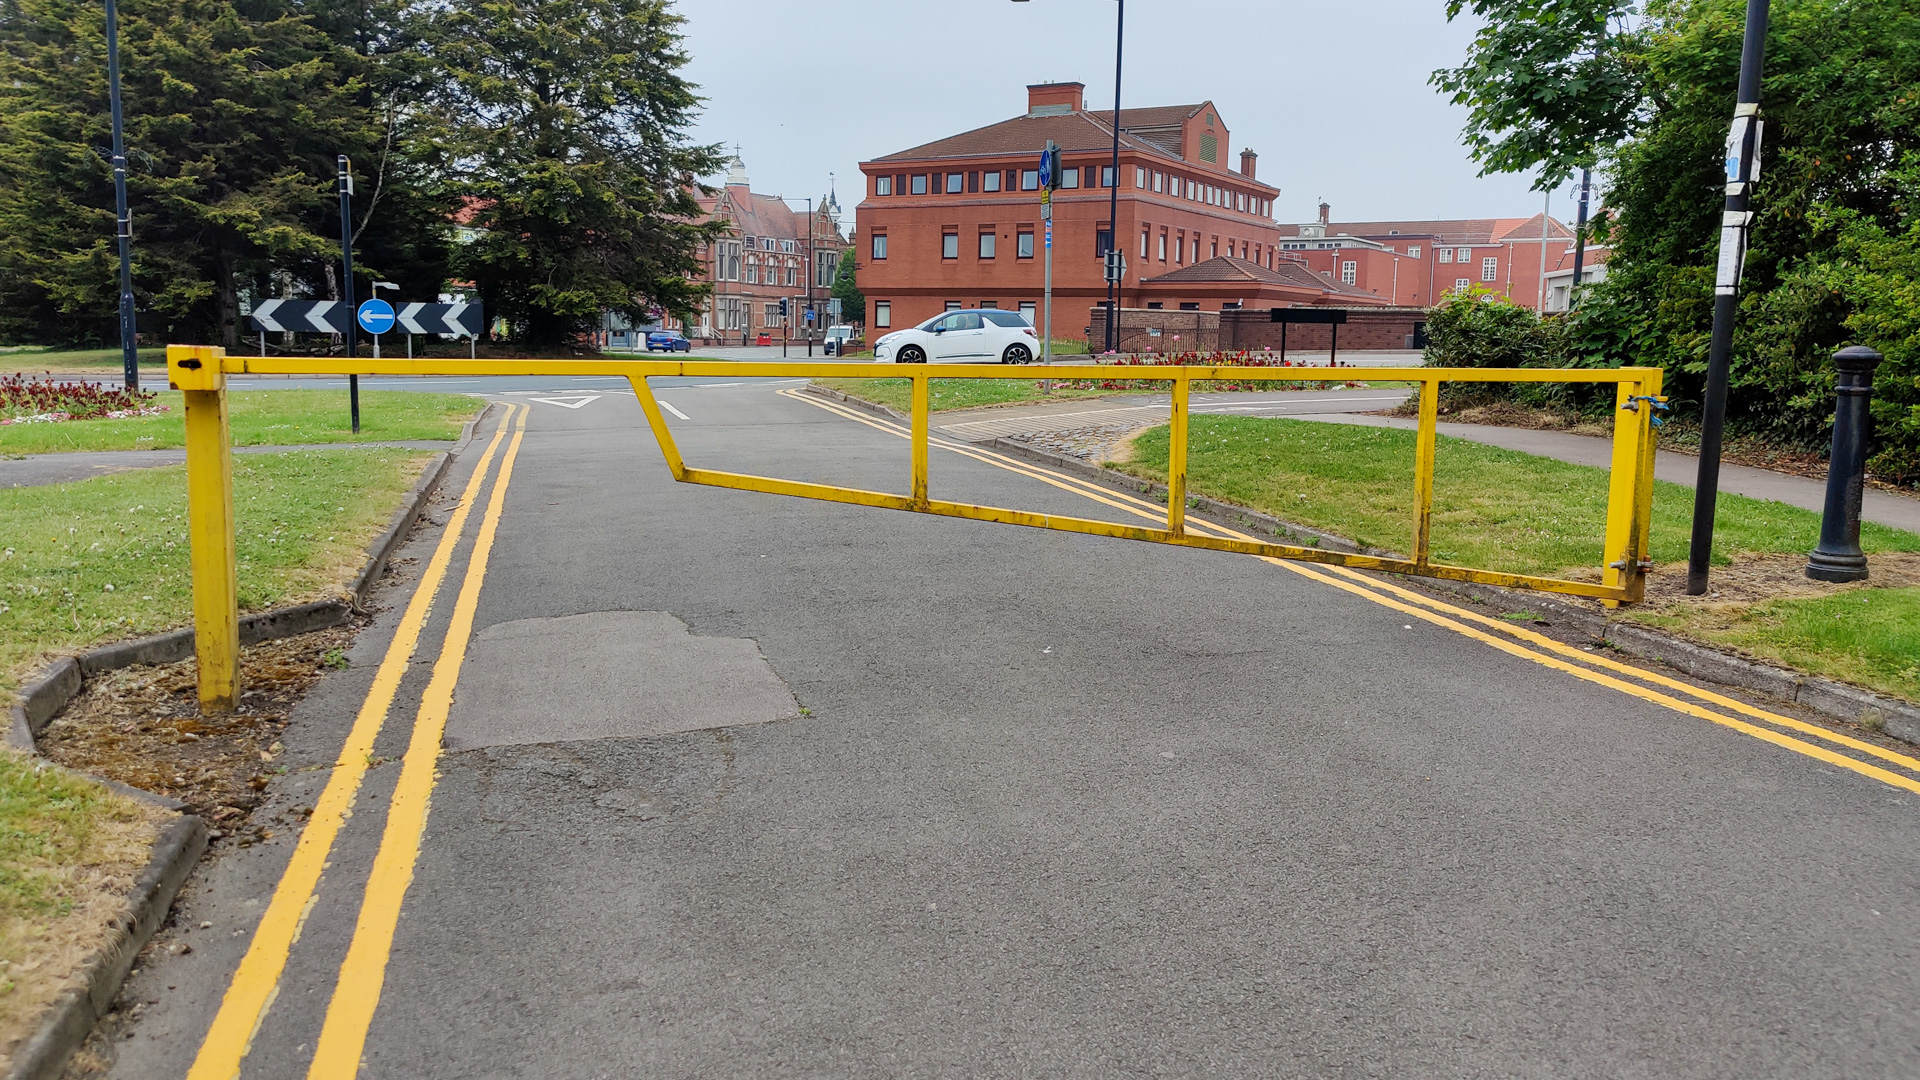 Access road secured with a closed yellow metal gate